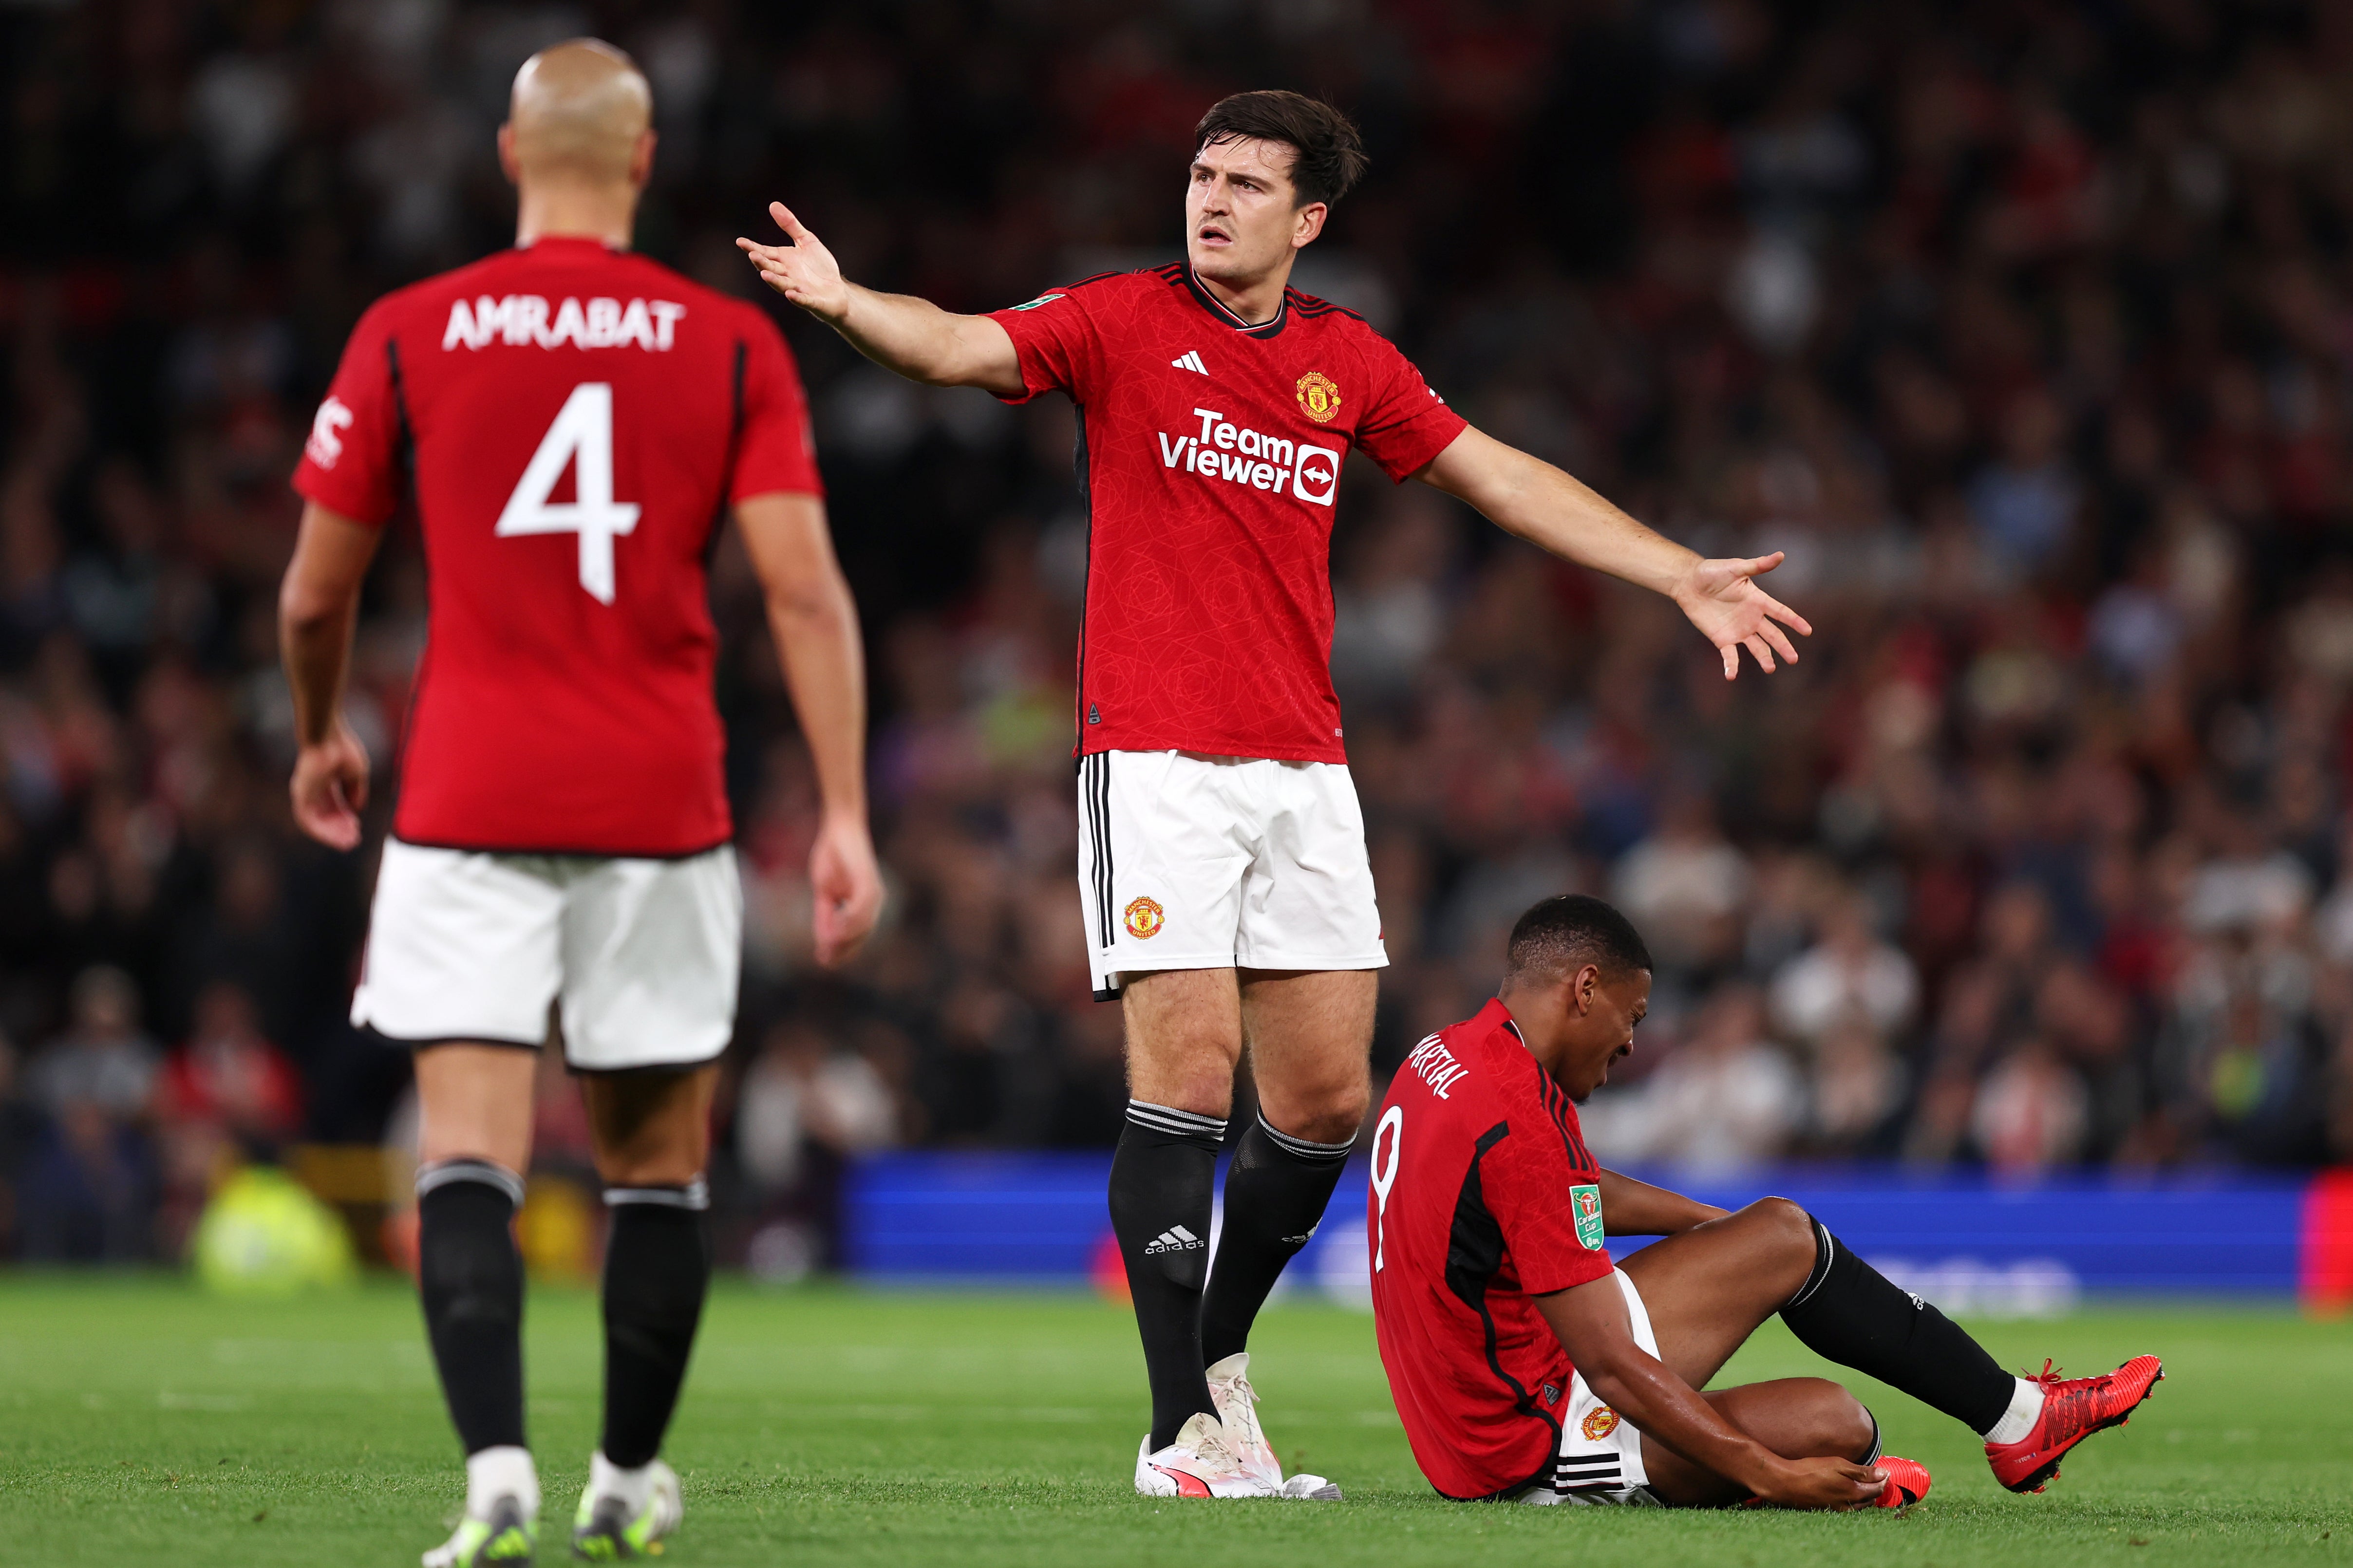 Manchester United have been bitten by the injury bug